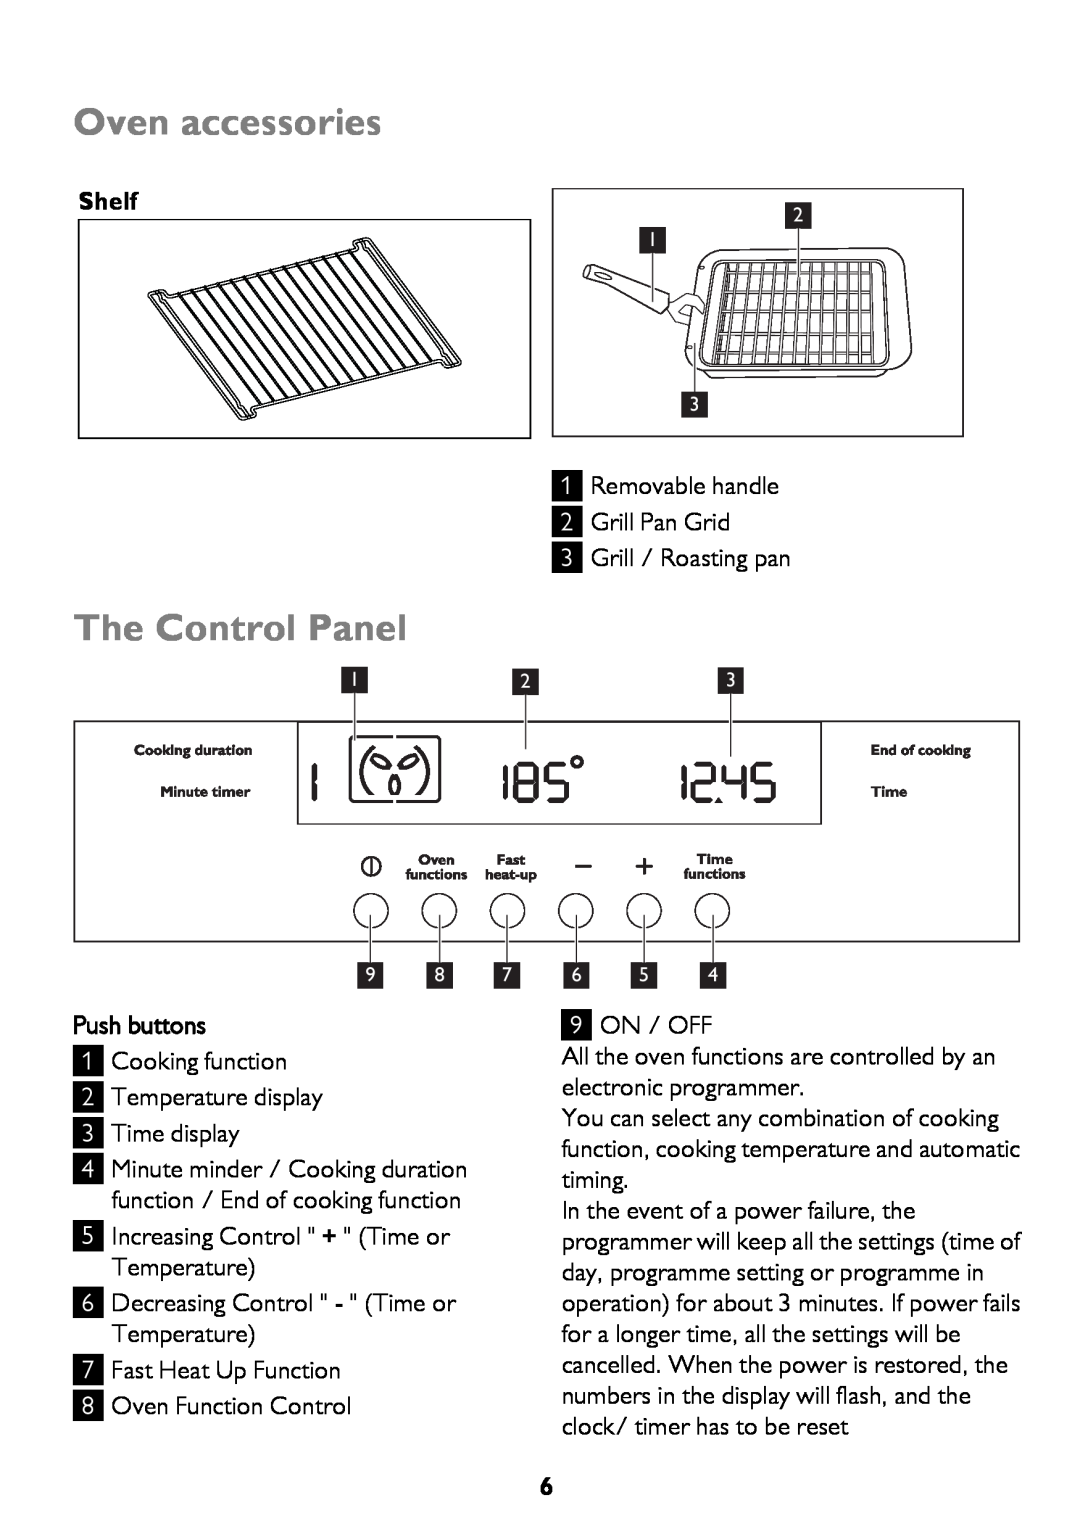 John Lewis JLBIOS662 instruction manual Oven accessories, The Control Panel, Shelf, Push buttons 